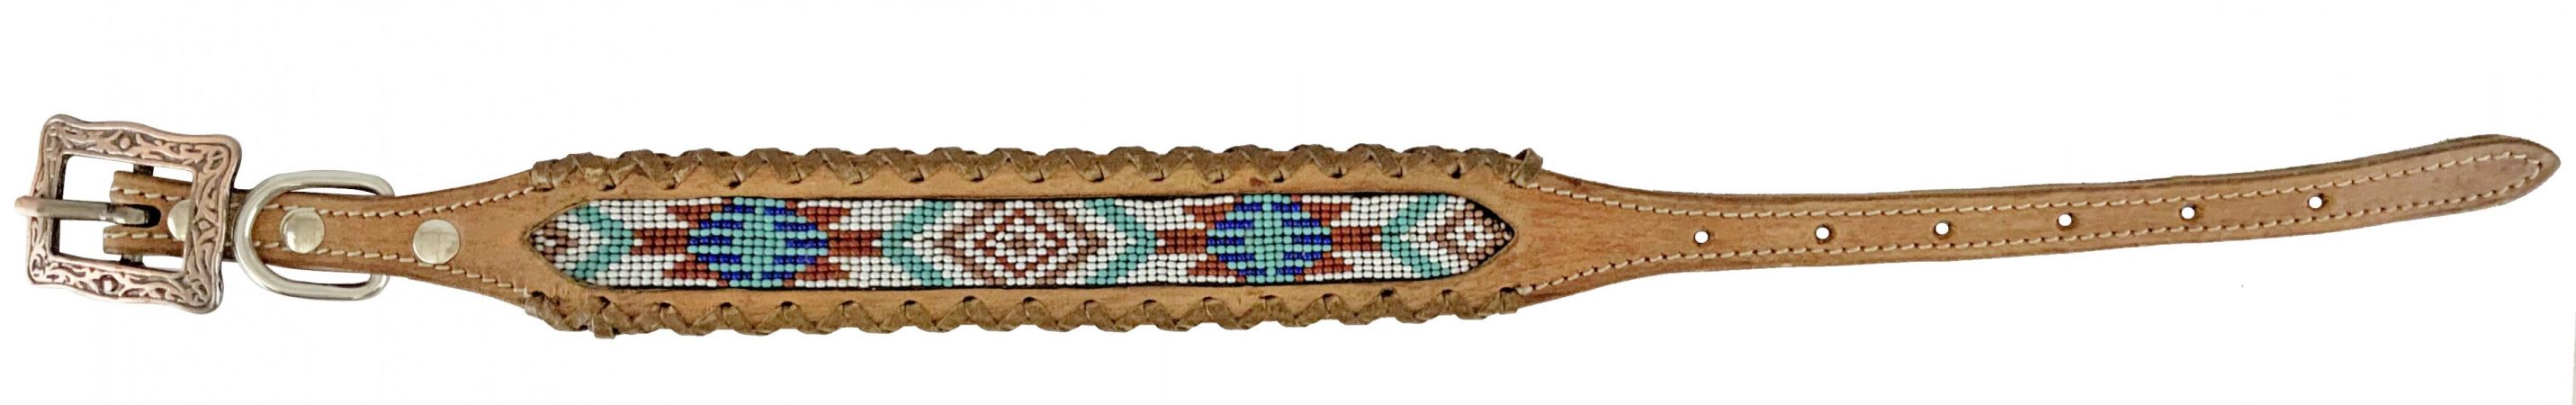 Showman Couture Genuine leather dog collar with beaded inlay - teal, white, and burgundy